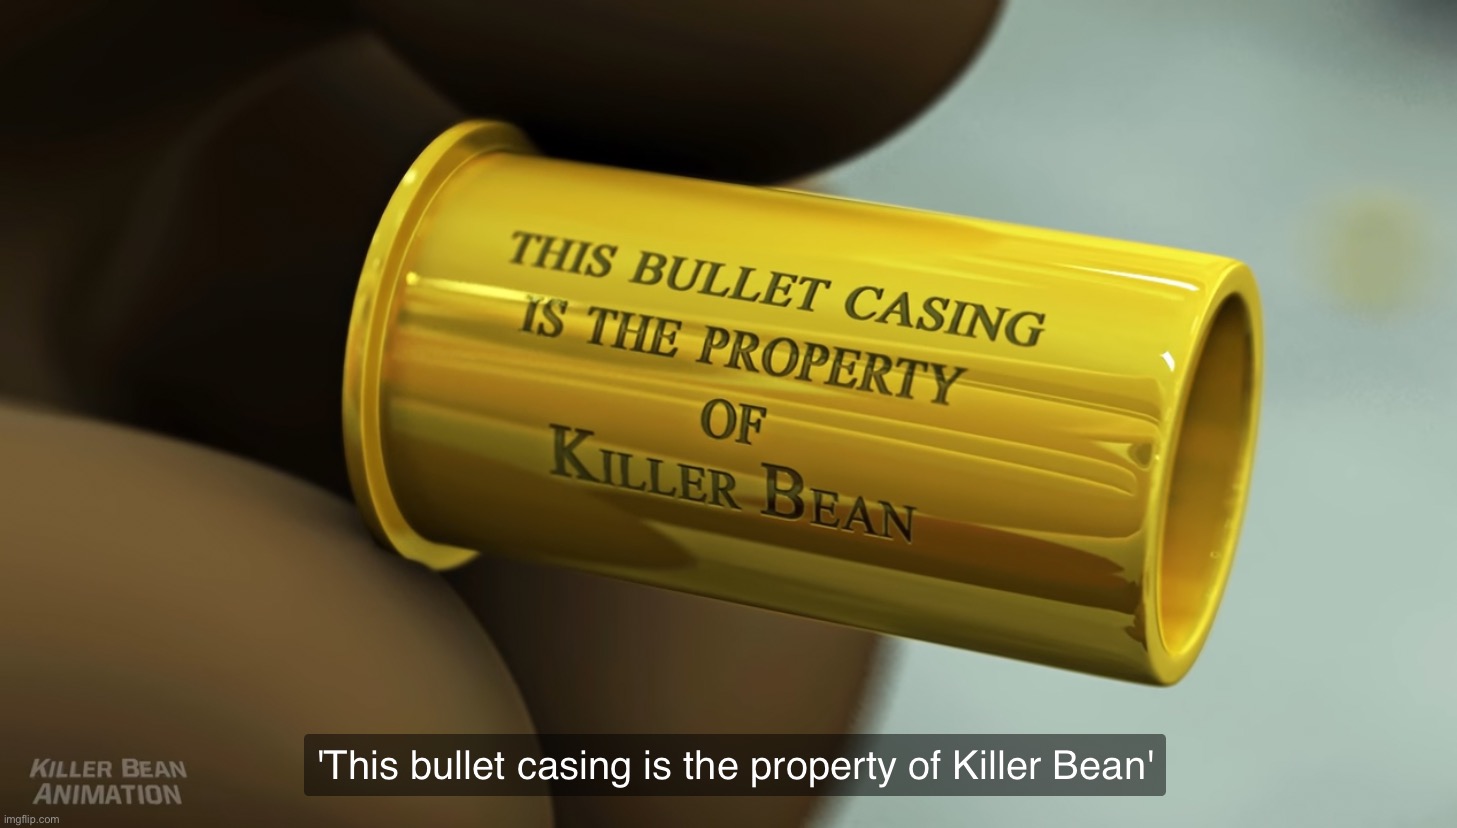 Killer Bean bullet casing | image tagged in killer bean bullet casing | made w/ Imgflip meme maker